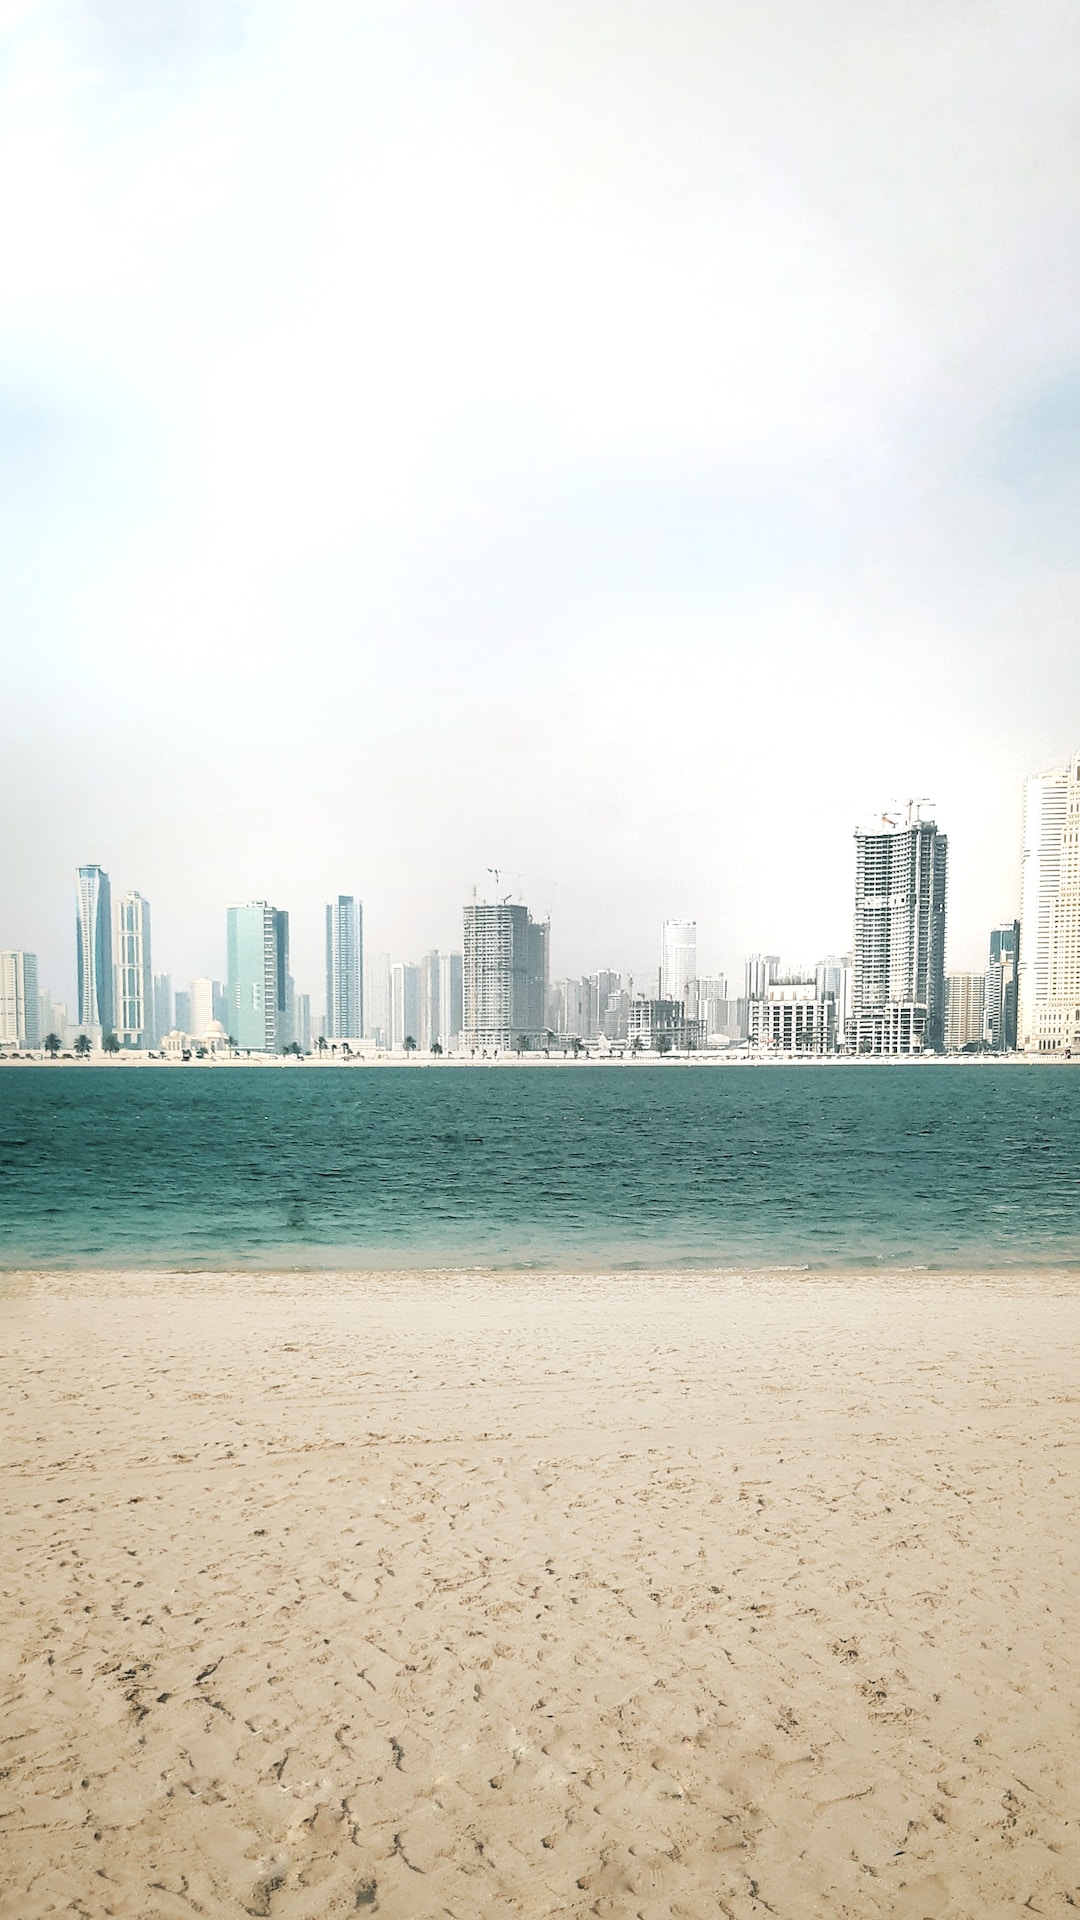 What is the ROI of commercial property in Dubai?